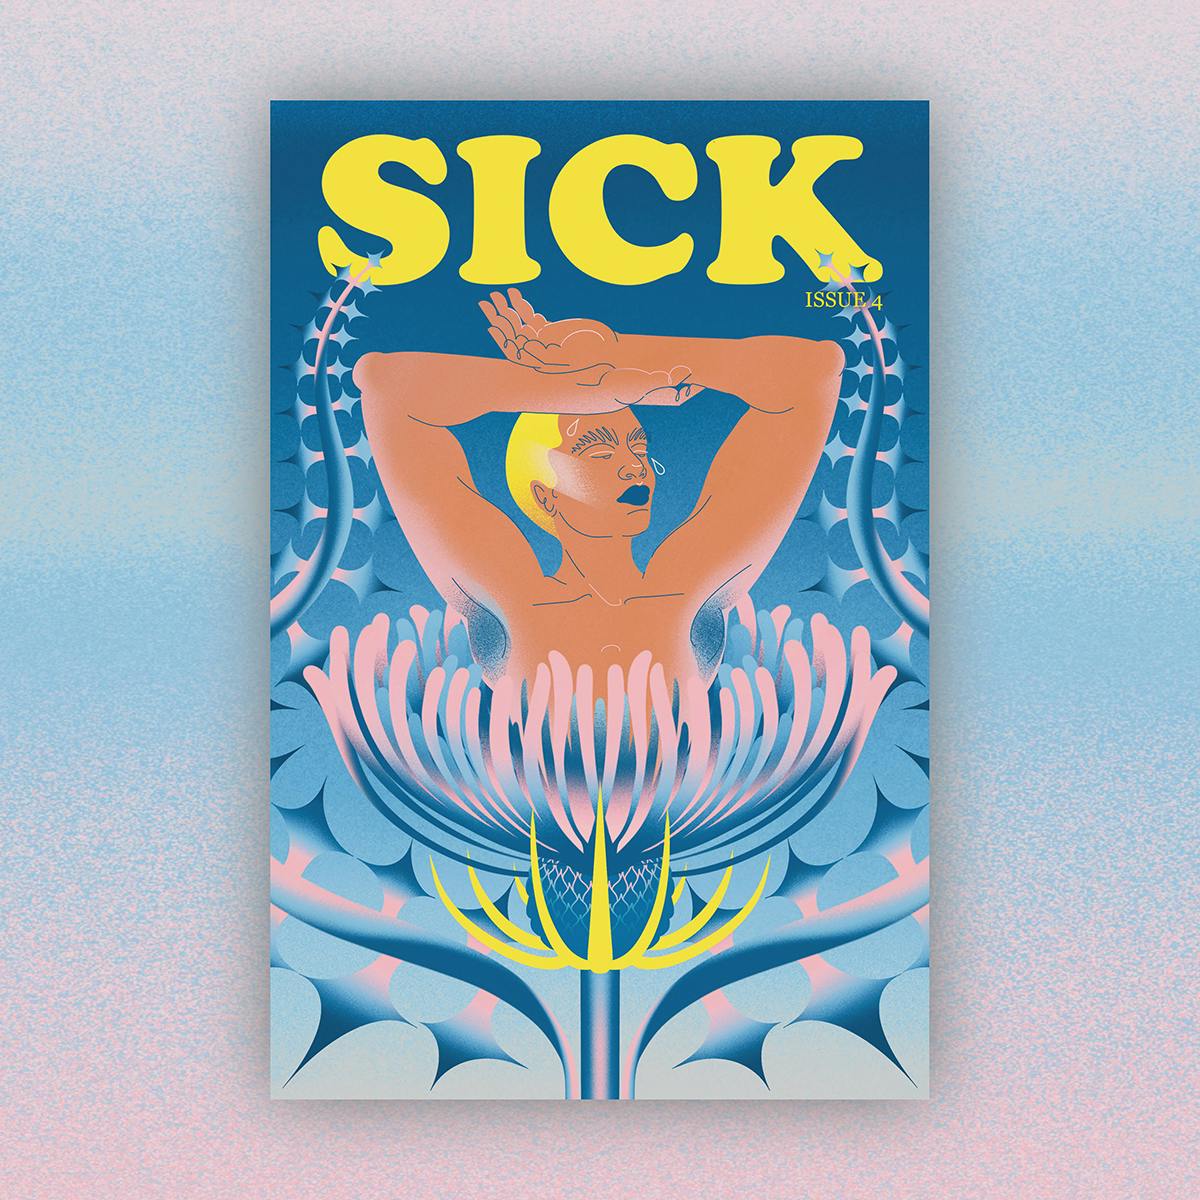 Good Reads: Sick magazine doesn’t sugar-coat stories of illness and disability